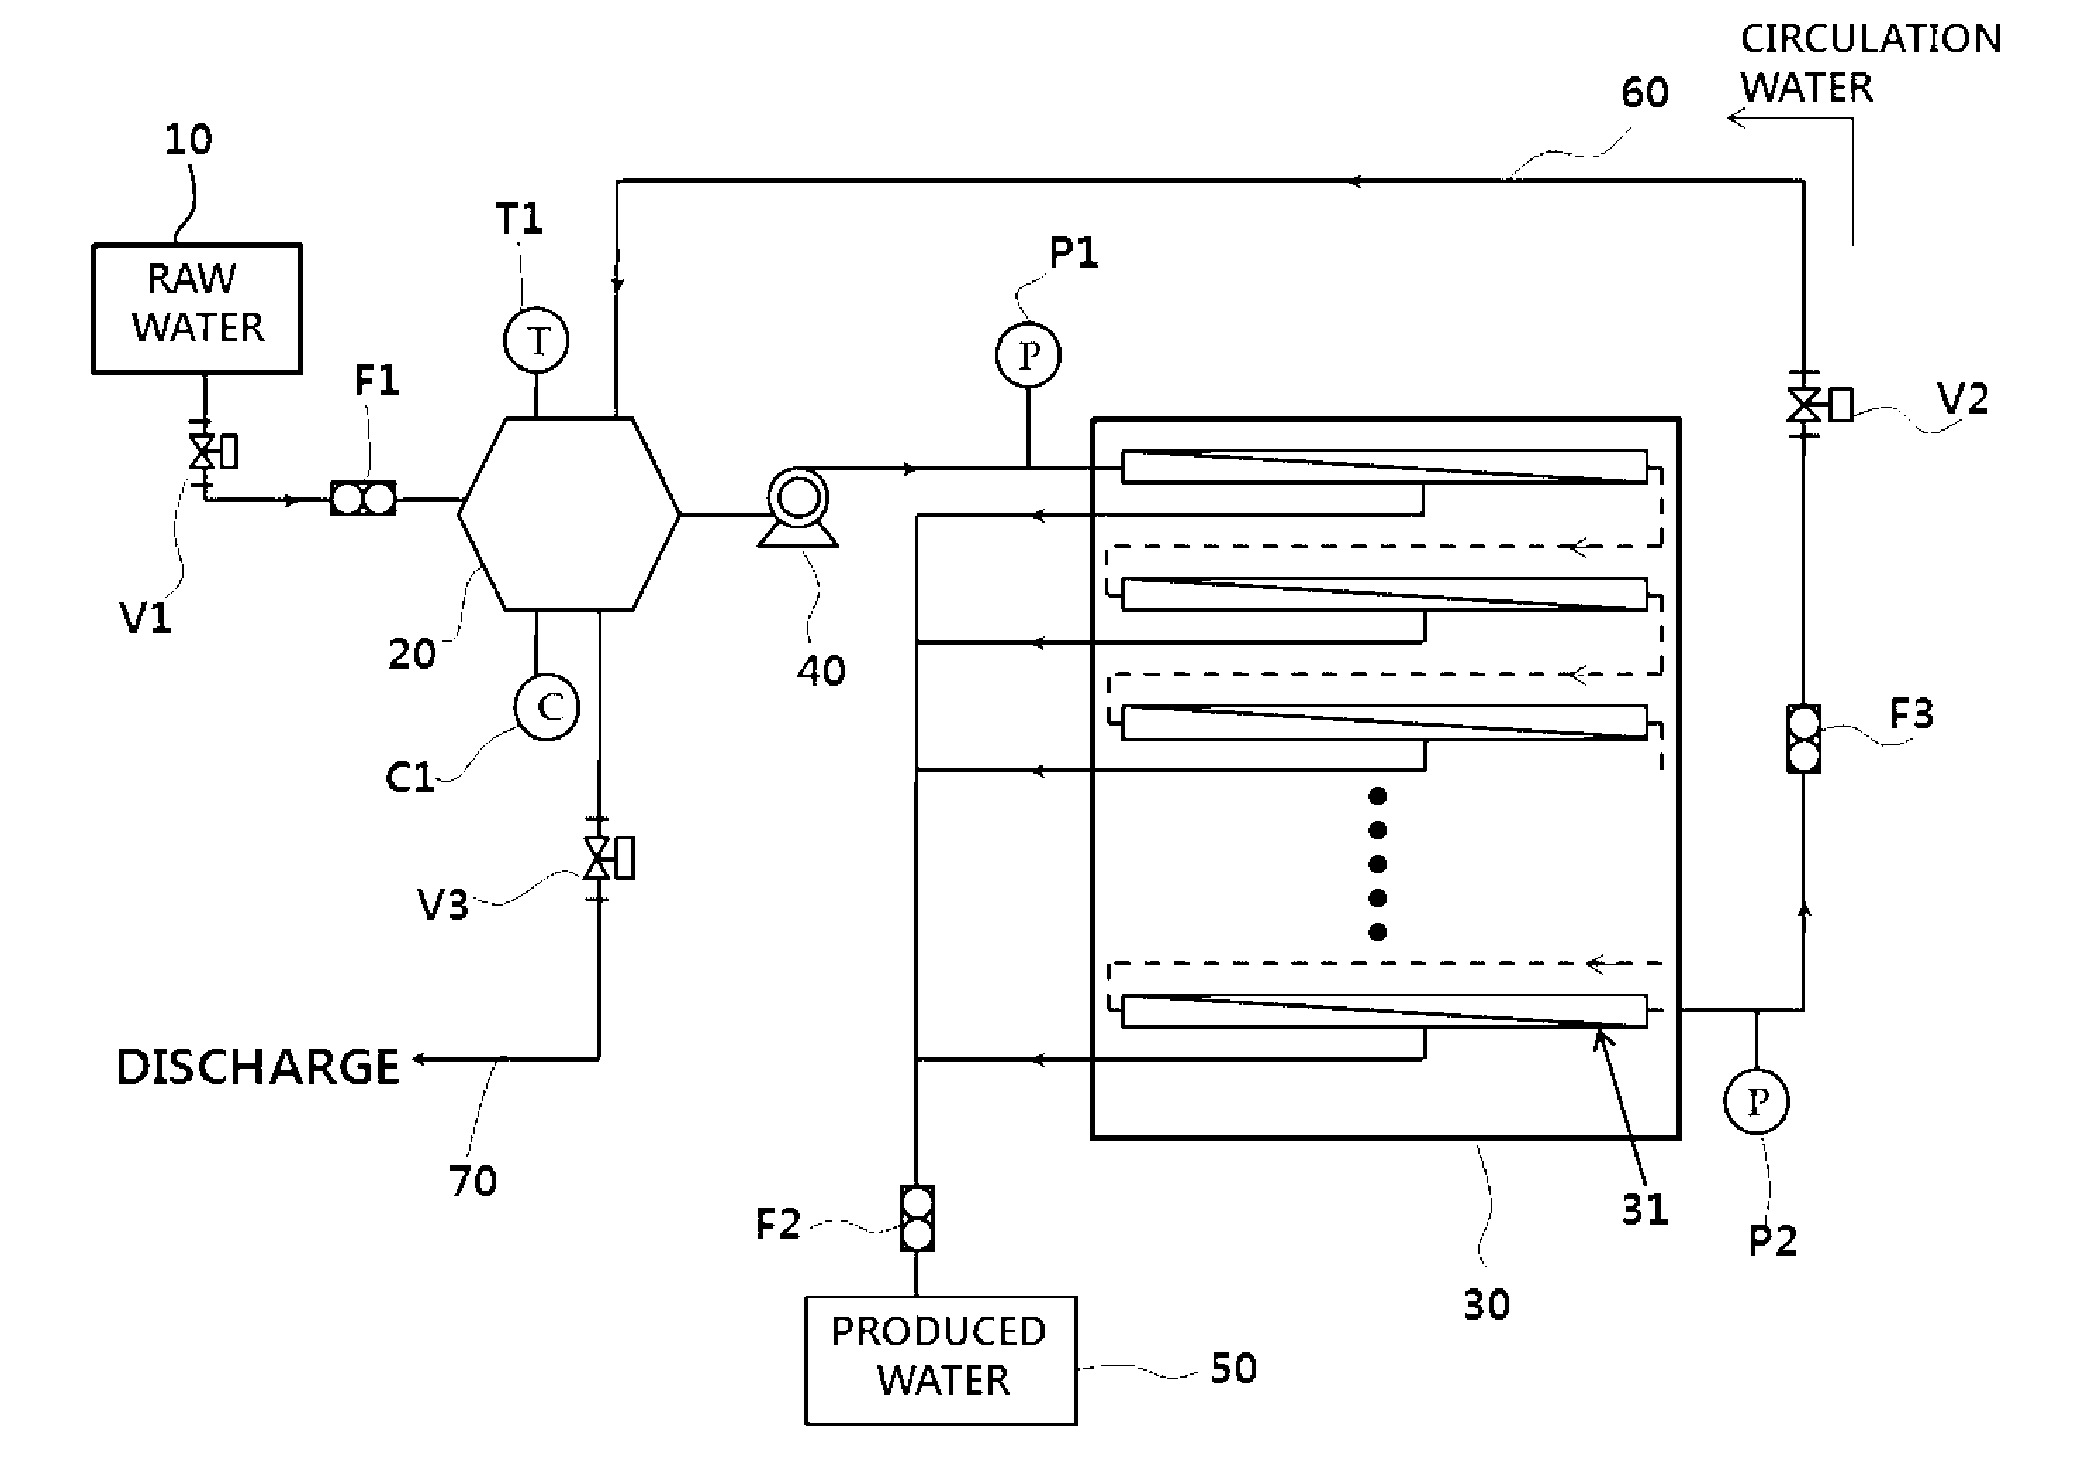 Sequencing batch type or batch type water-filtering apparatus and method of operating the same